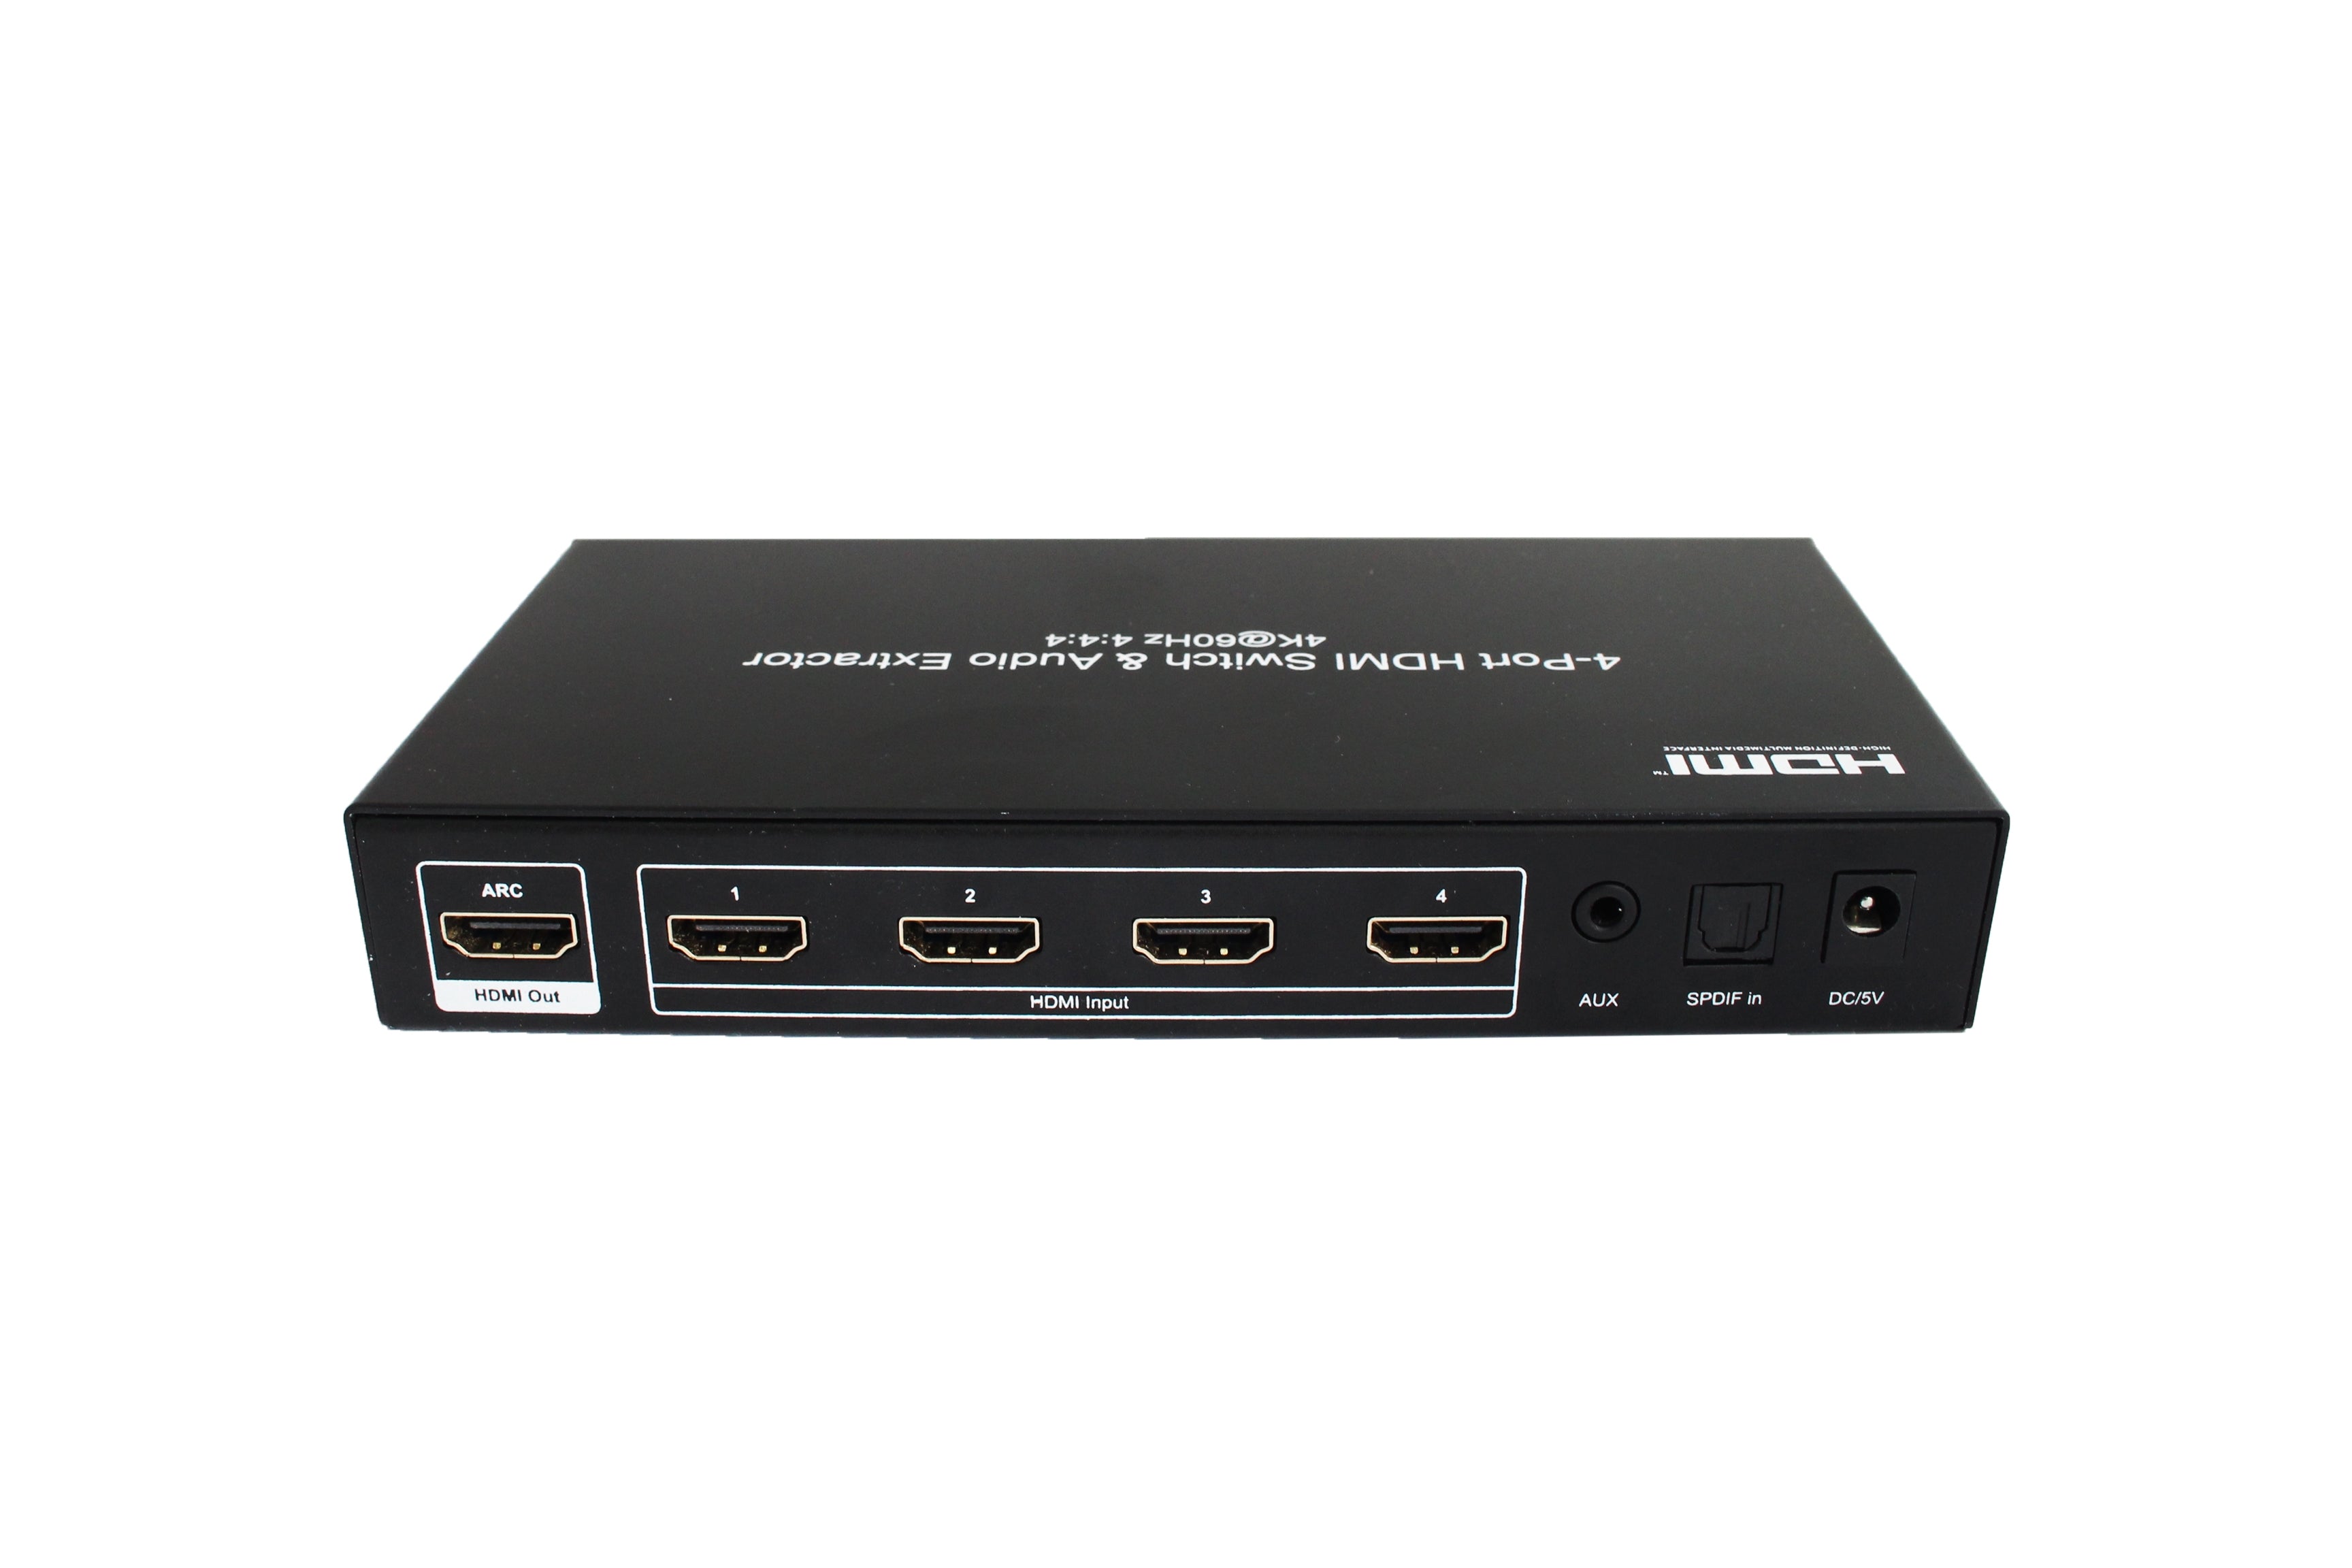 16-6841-44 HDMI 2.0 Switch 4 In 1 Out, 4K@60Hz YUV4:4:4, Support ARC, CEC, HDR